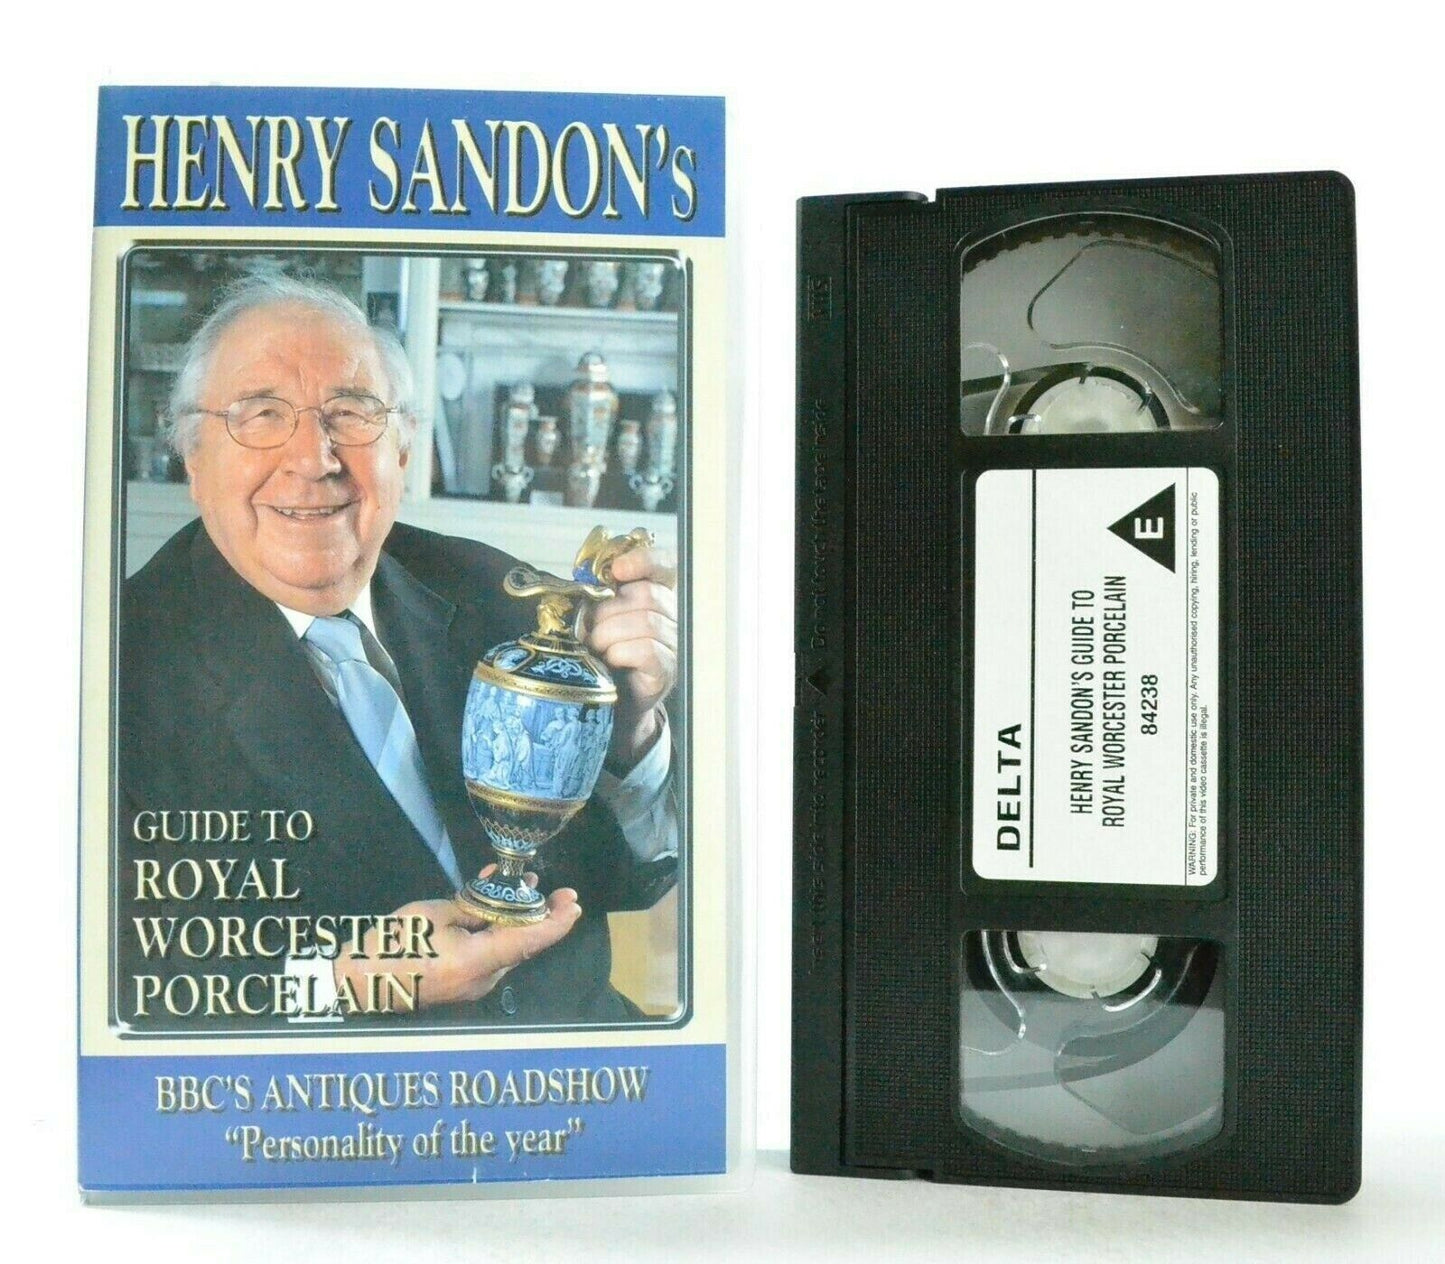 Guide To Worcester Porcelain: By Henry Sandon - BBC Antiques Roadshow - Pal VHS-